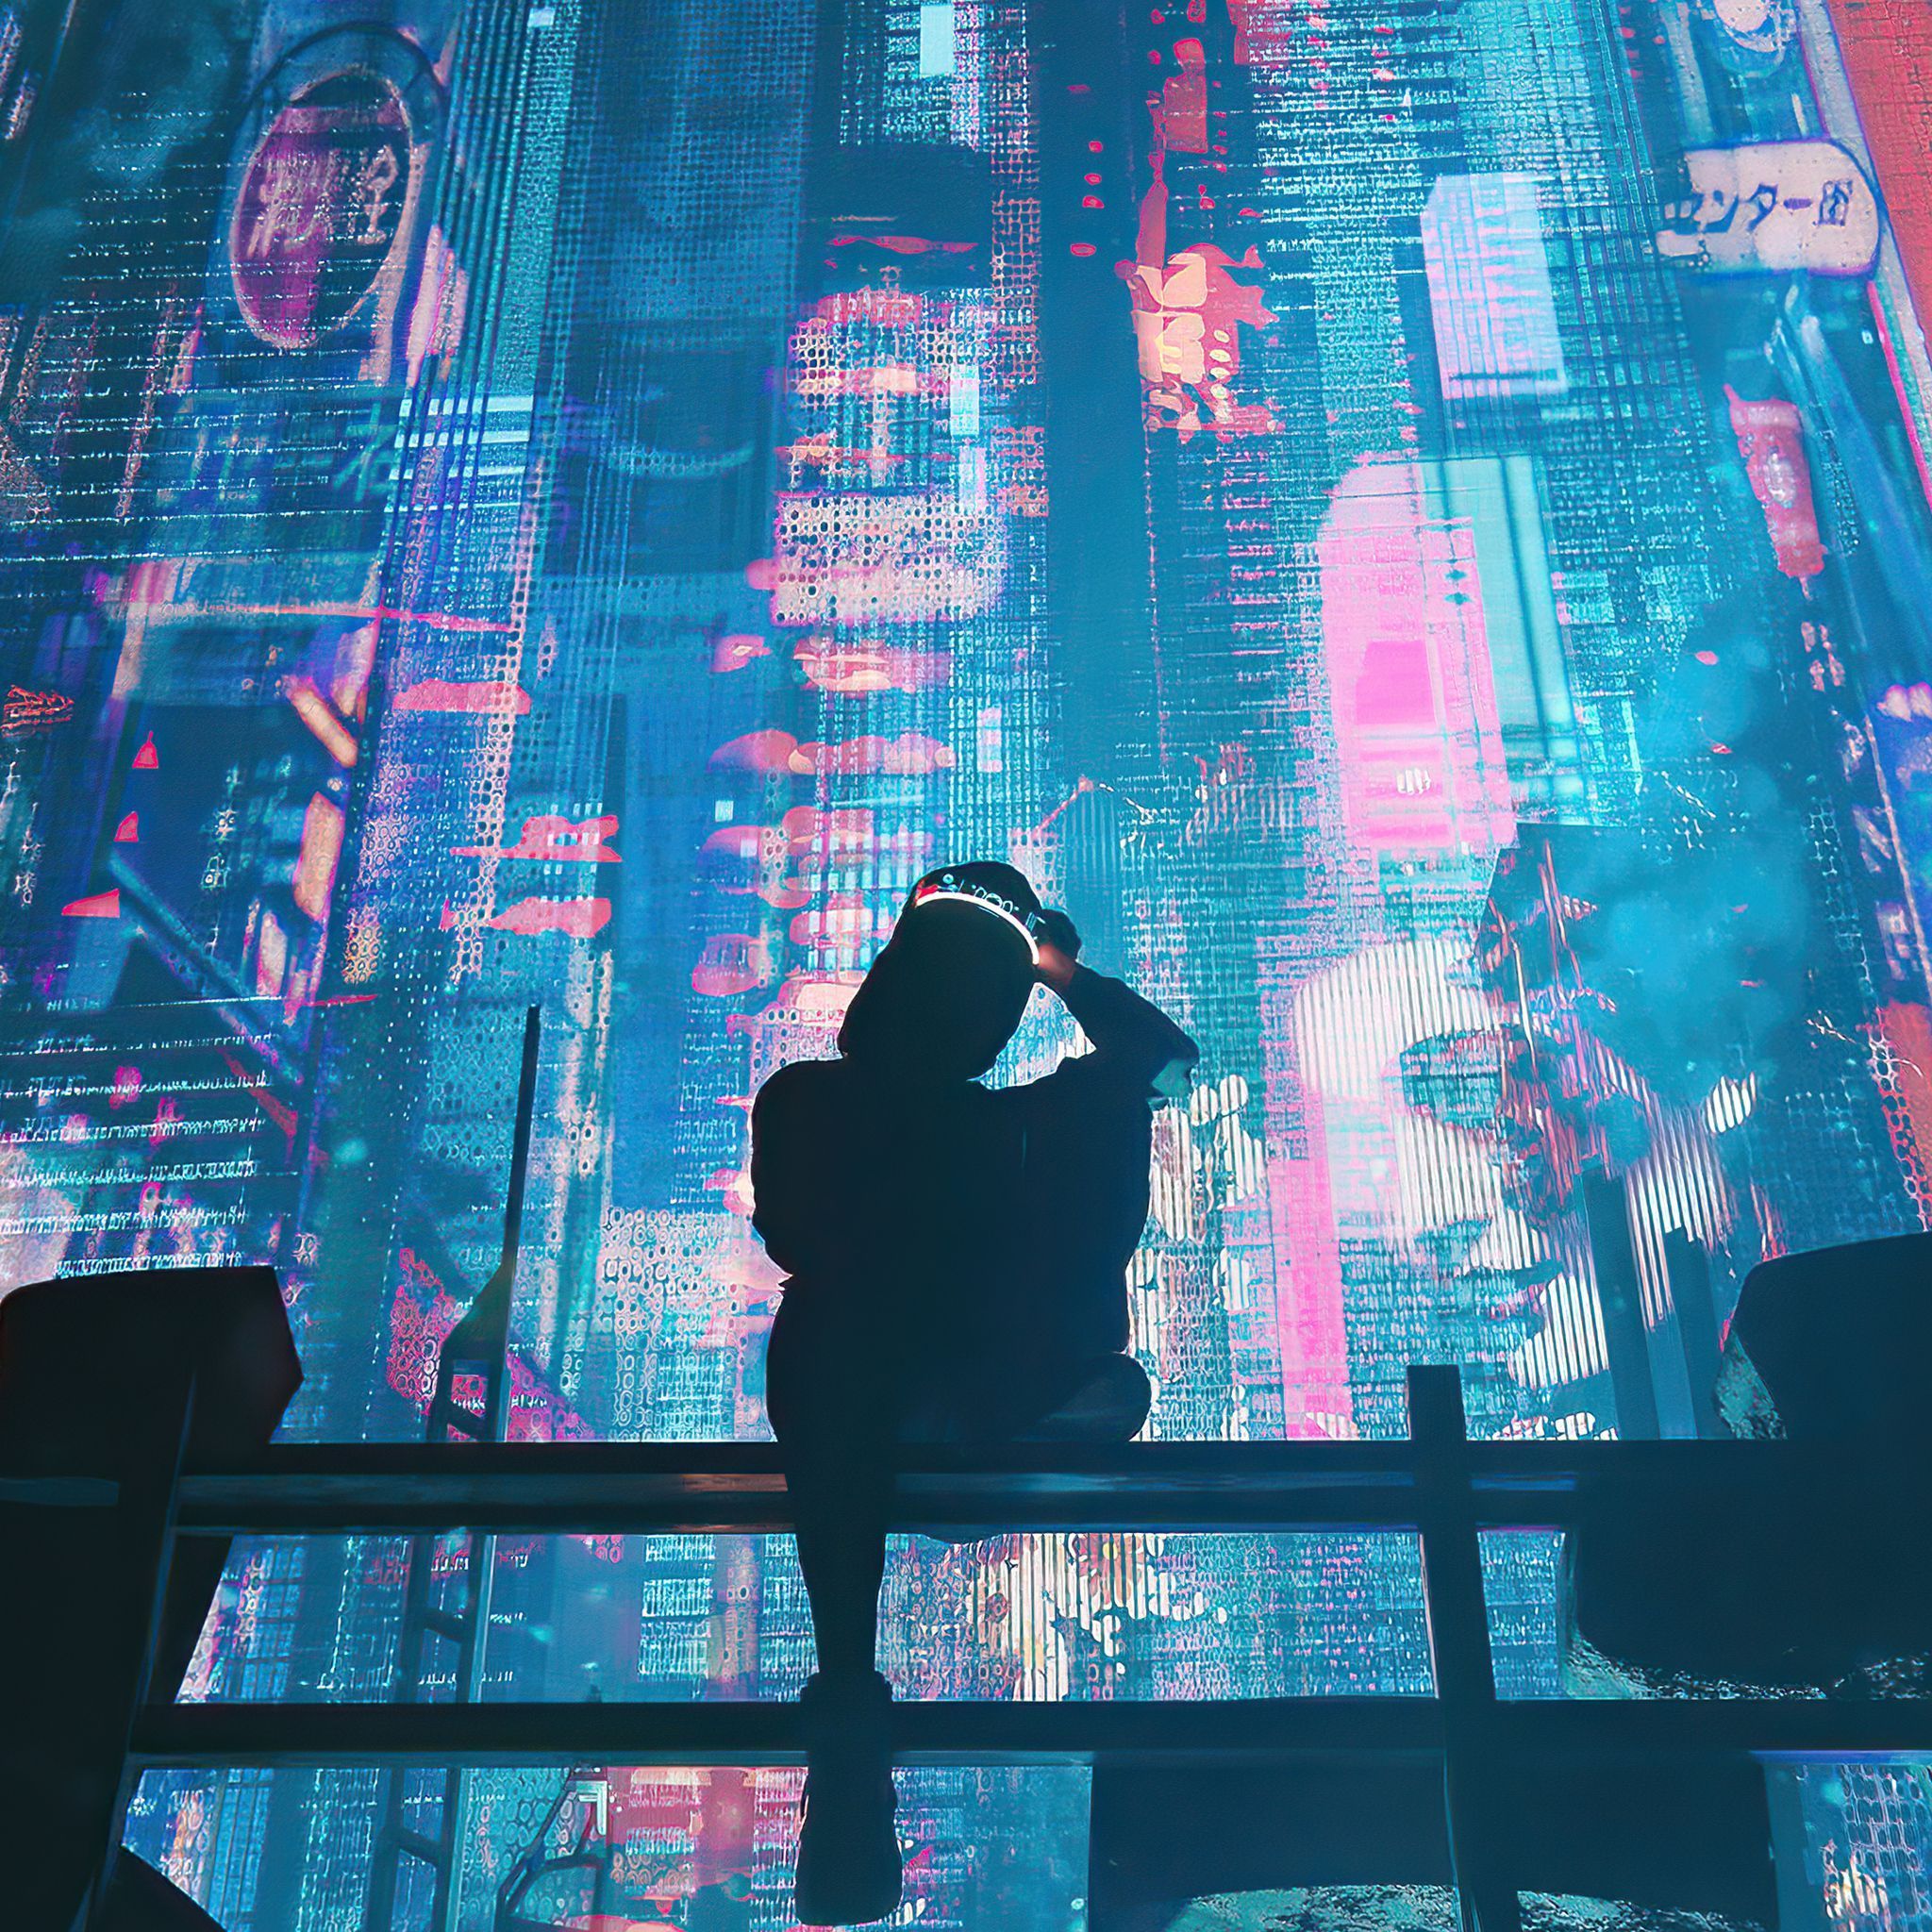 A person in a dark room with a VR headset on, looking out at a cyberpunk city. - Cyberpunk